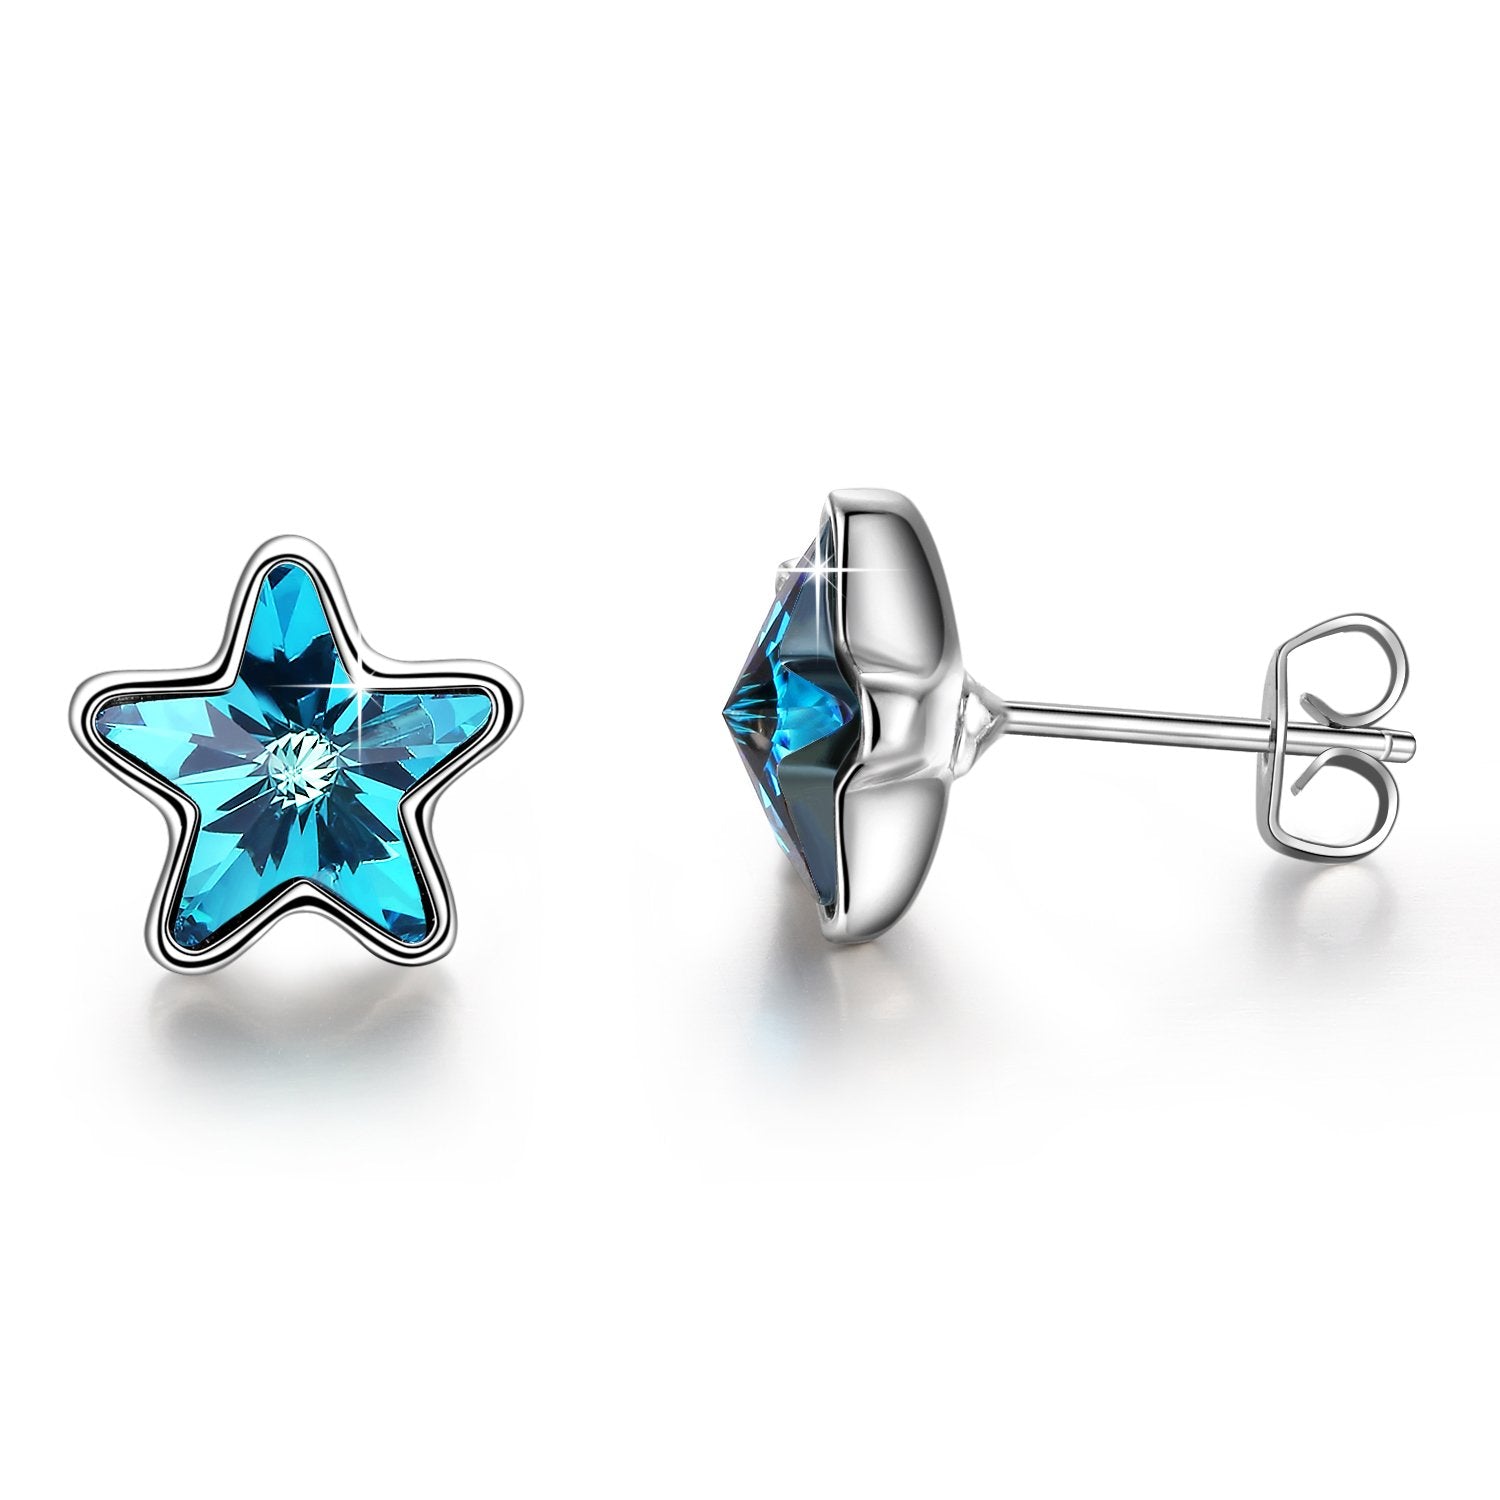 Yellow Chimes Crystal from Swarovski Designer Blue Star Crystal Earrings for Women and Girls